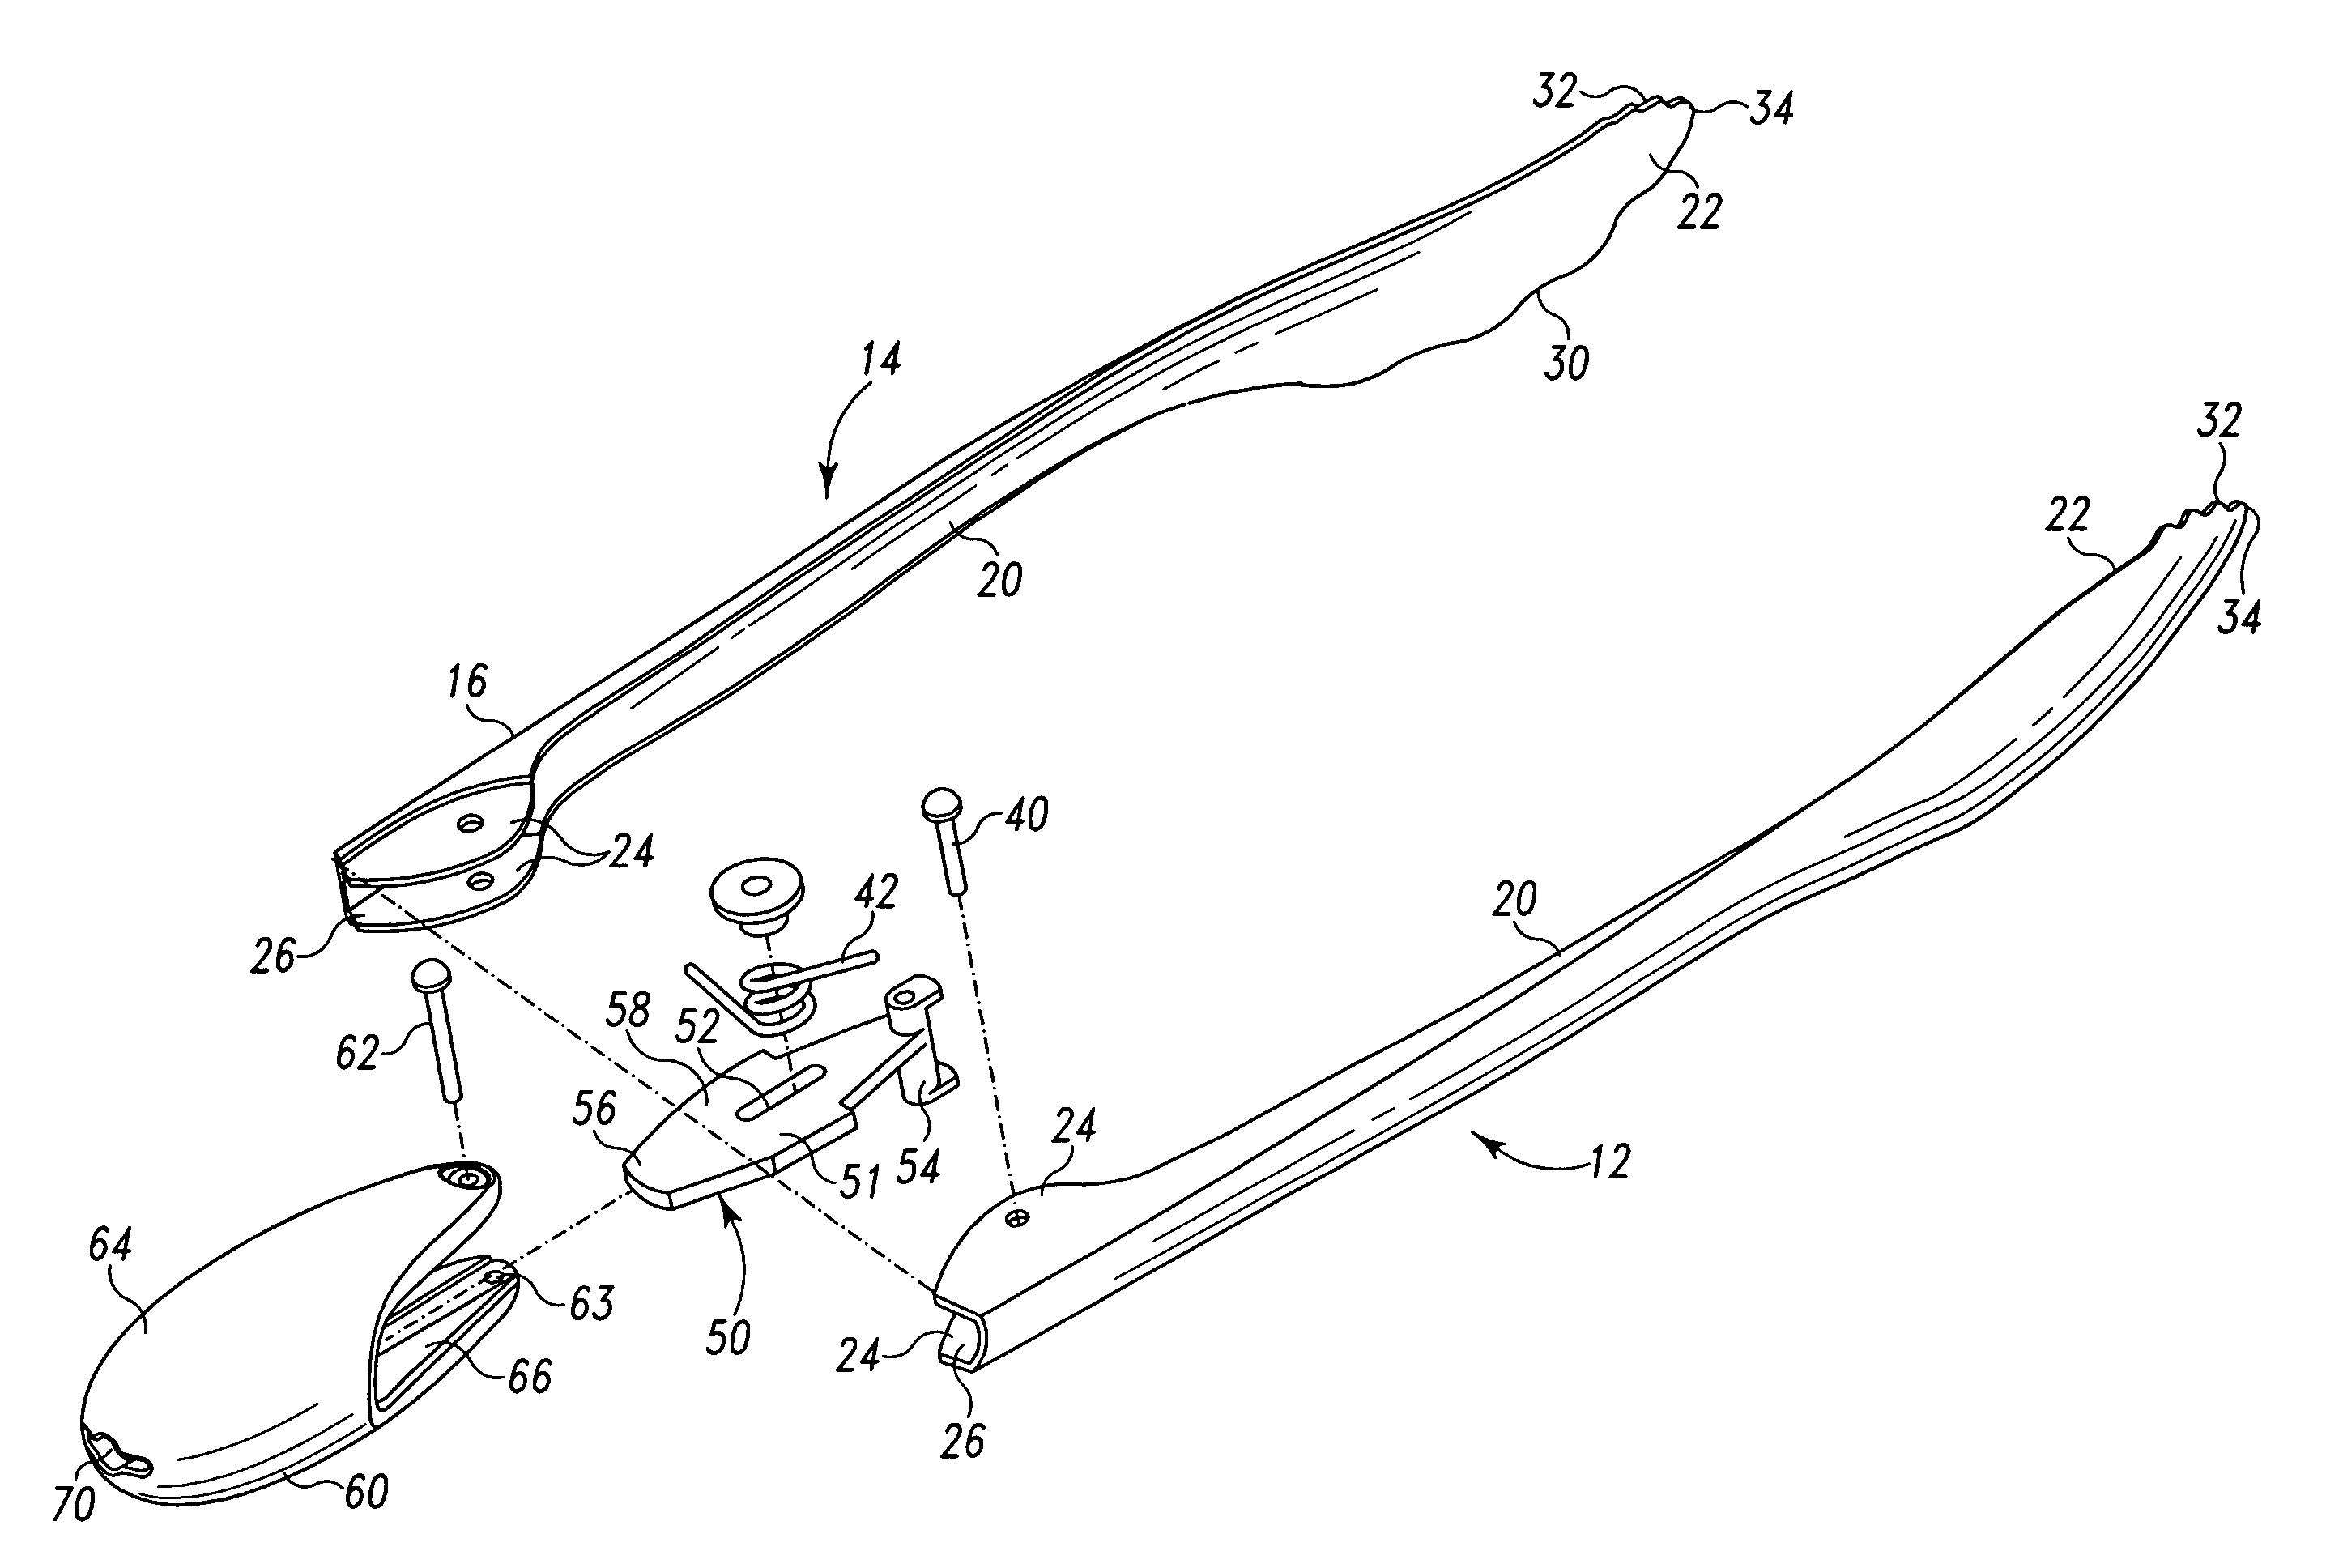 Tongs with encapsulated locking mechanism